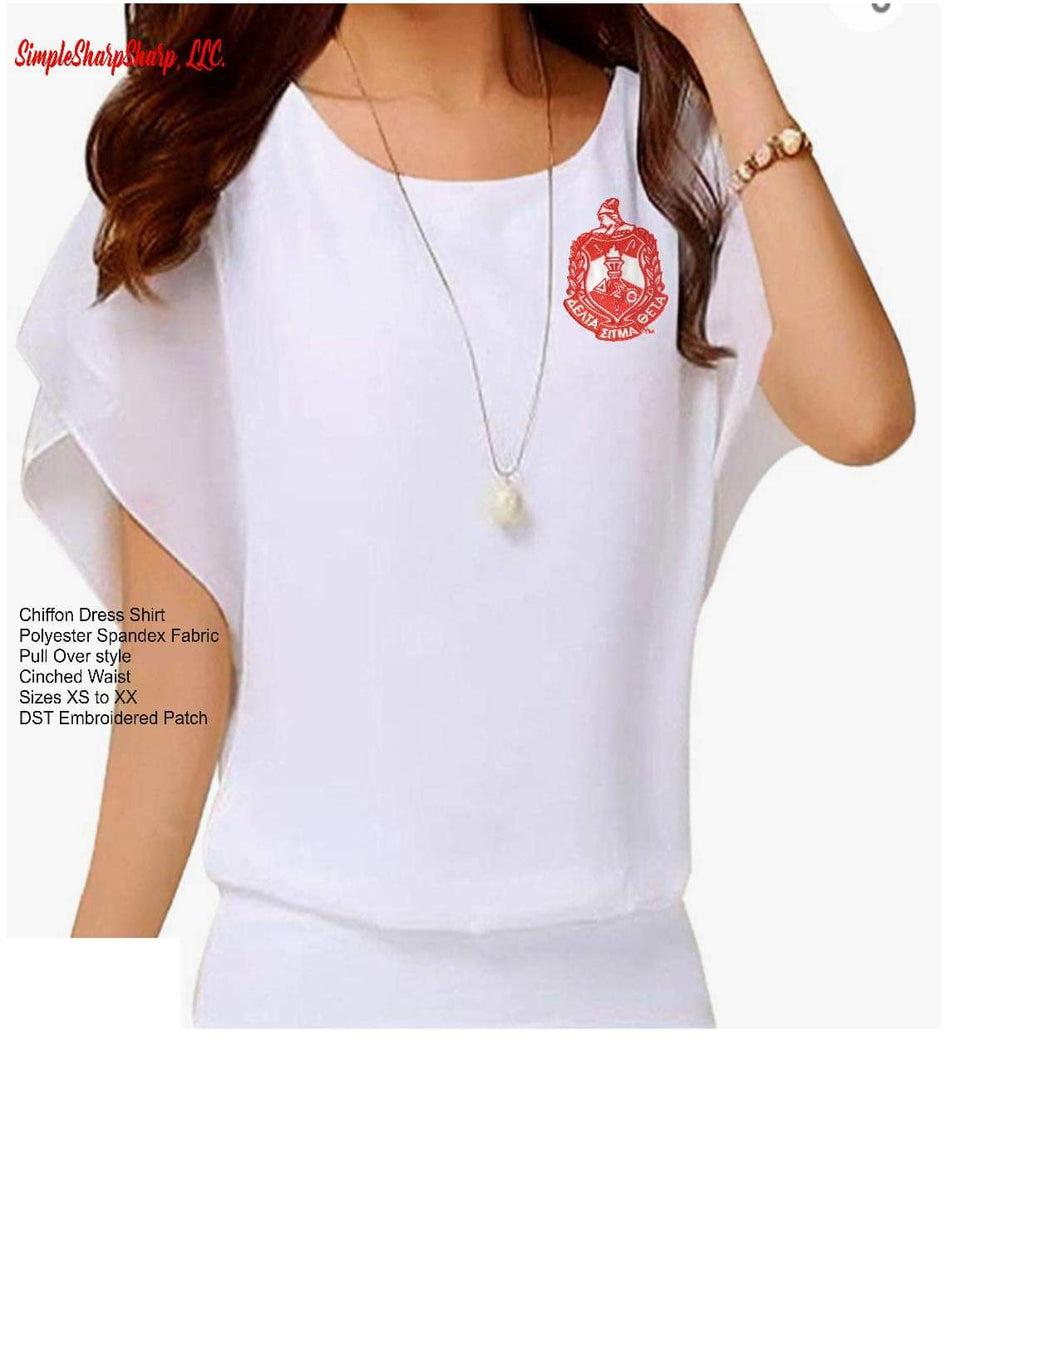 White Chiffon Dress Top with DST Embroidered Shield